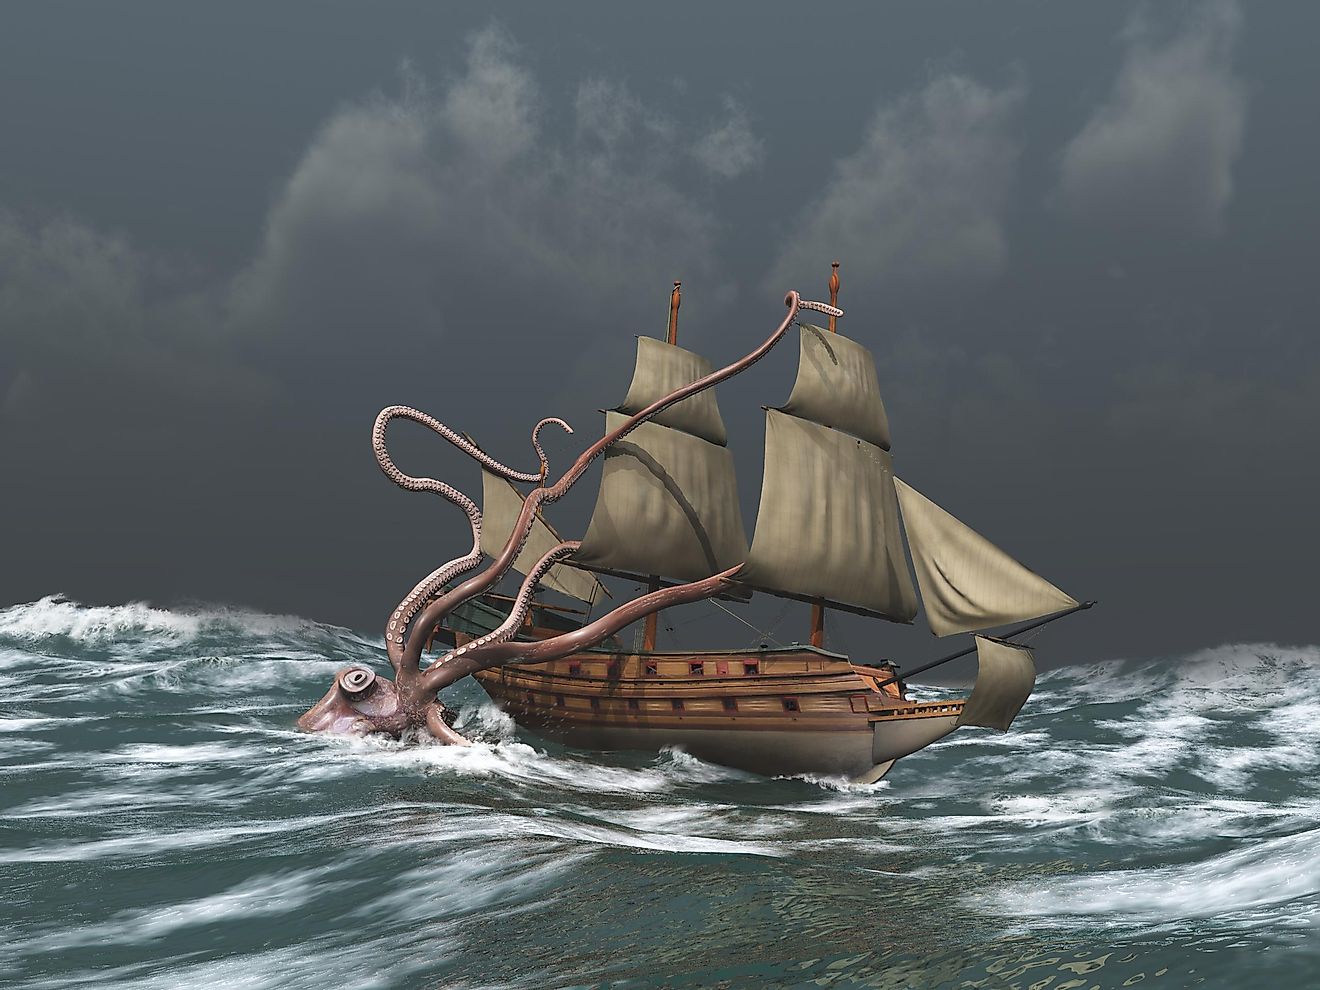 Though there have only been sightings of already dead Colossal (Antarctic) Squids, gigantic squids such as "The Kraken" have long been seafarers' worst nightmares.